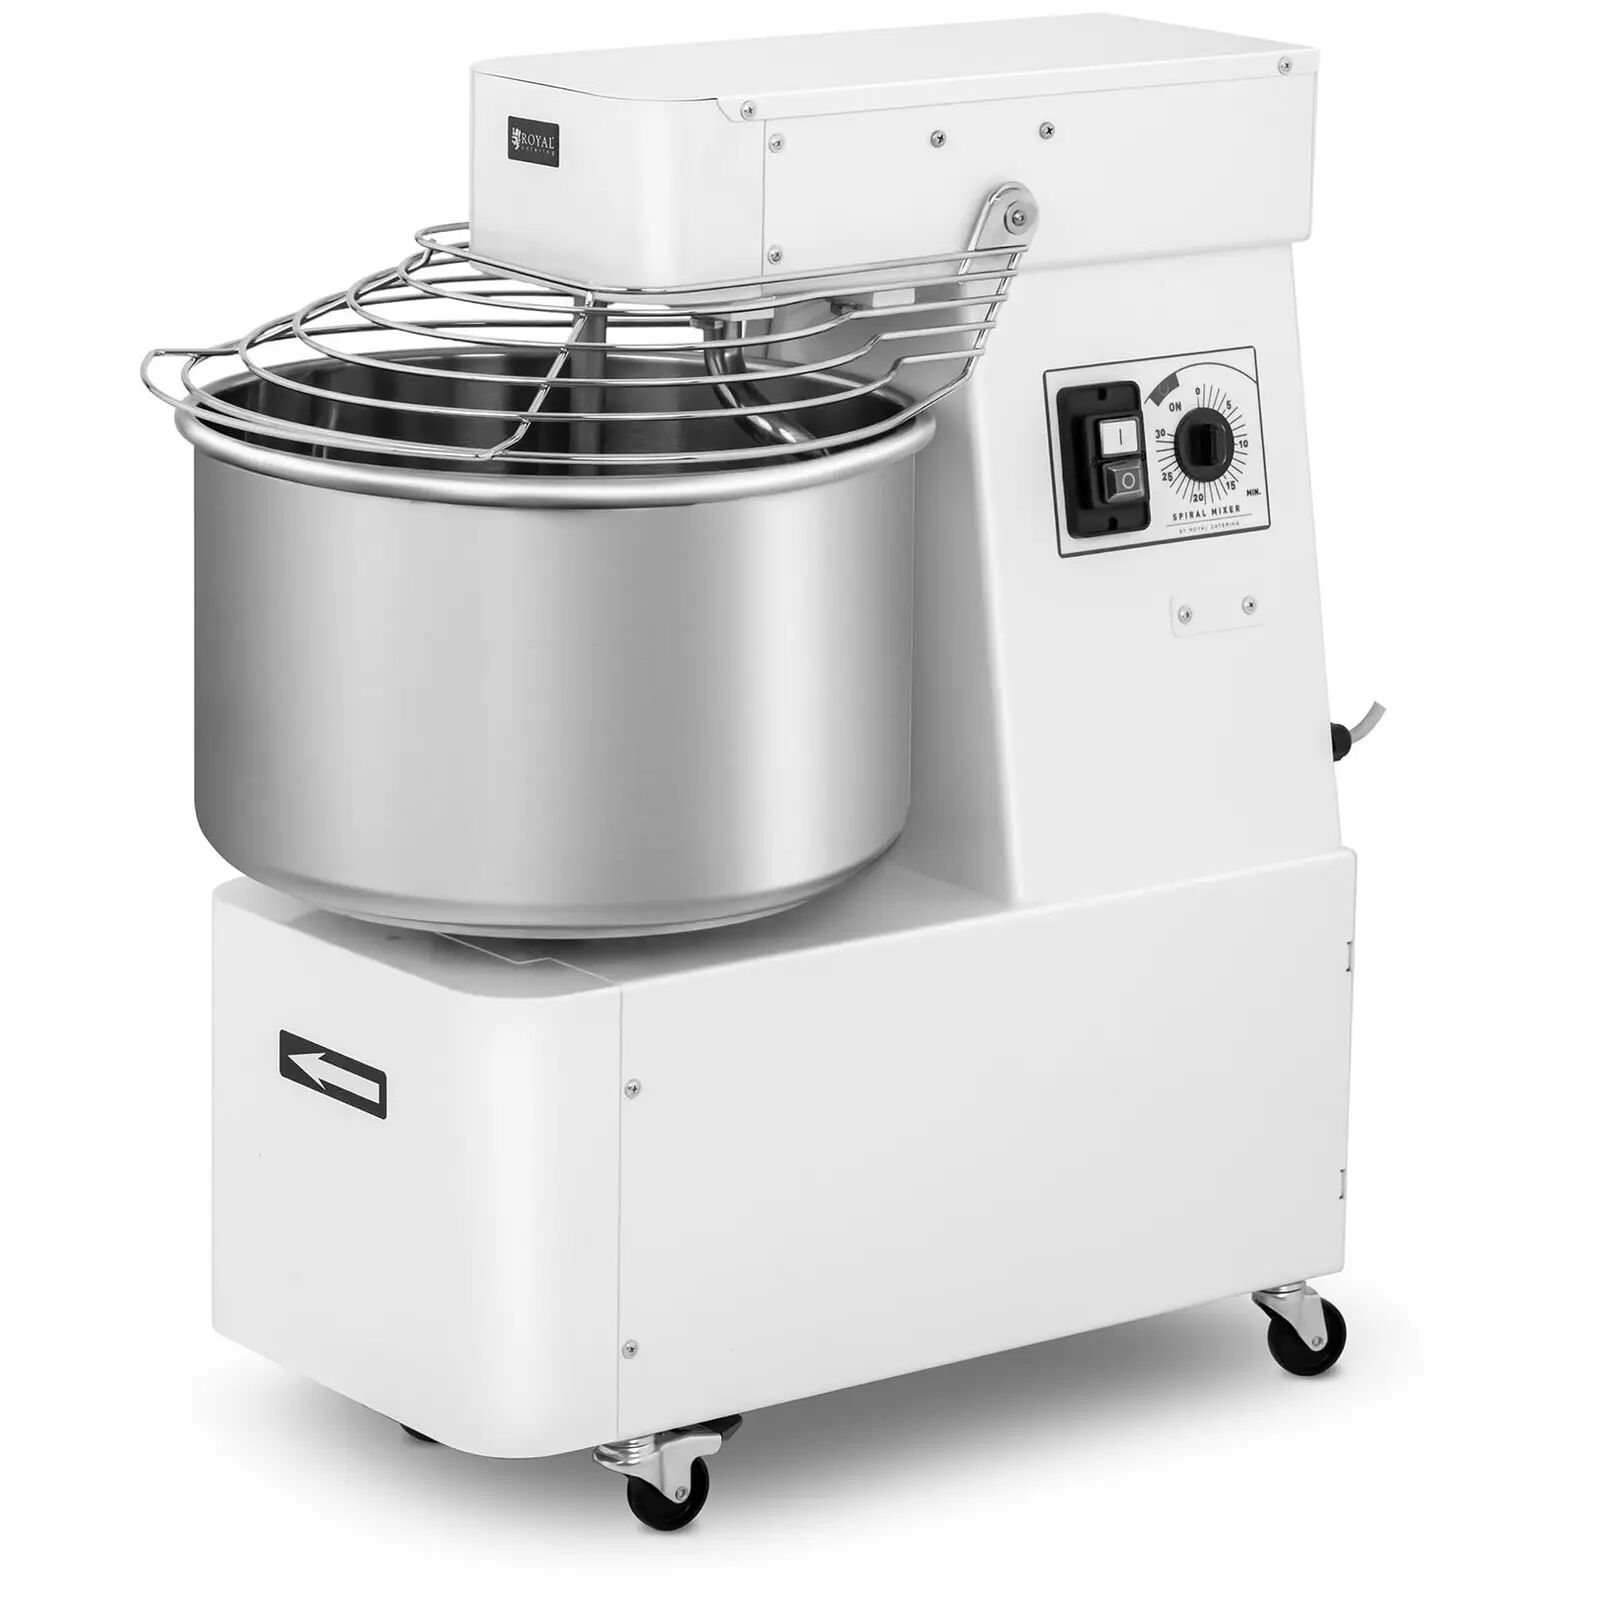 Royal Catering Kneading Machine - 32 L - 88 kg/h - 1,100 W - fixed head and bowl RC-SPFH30